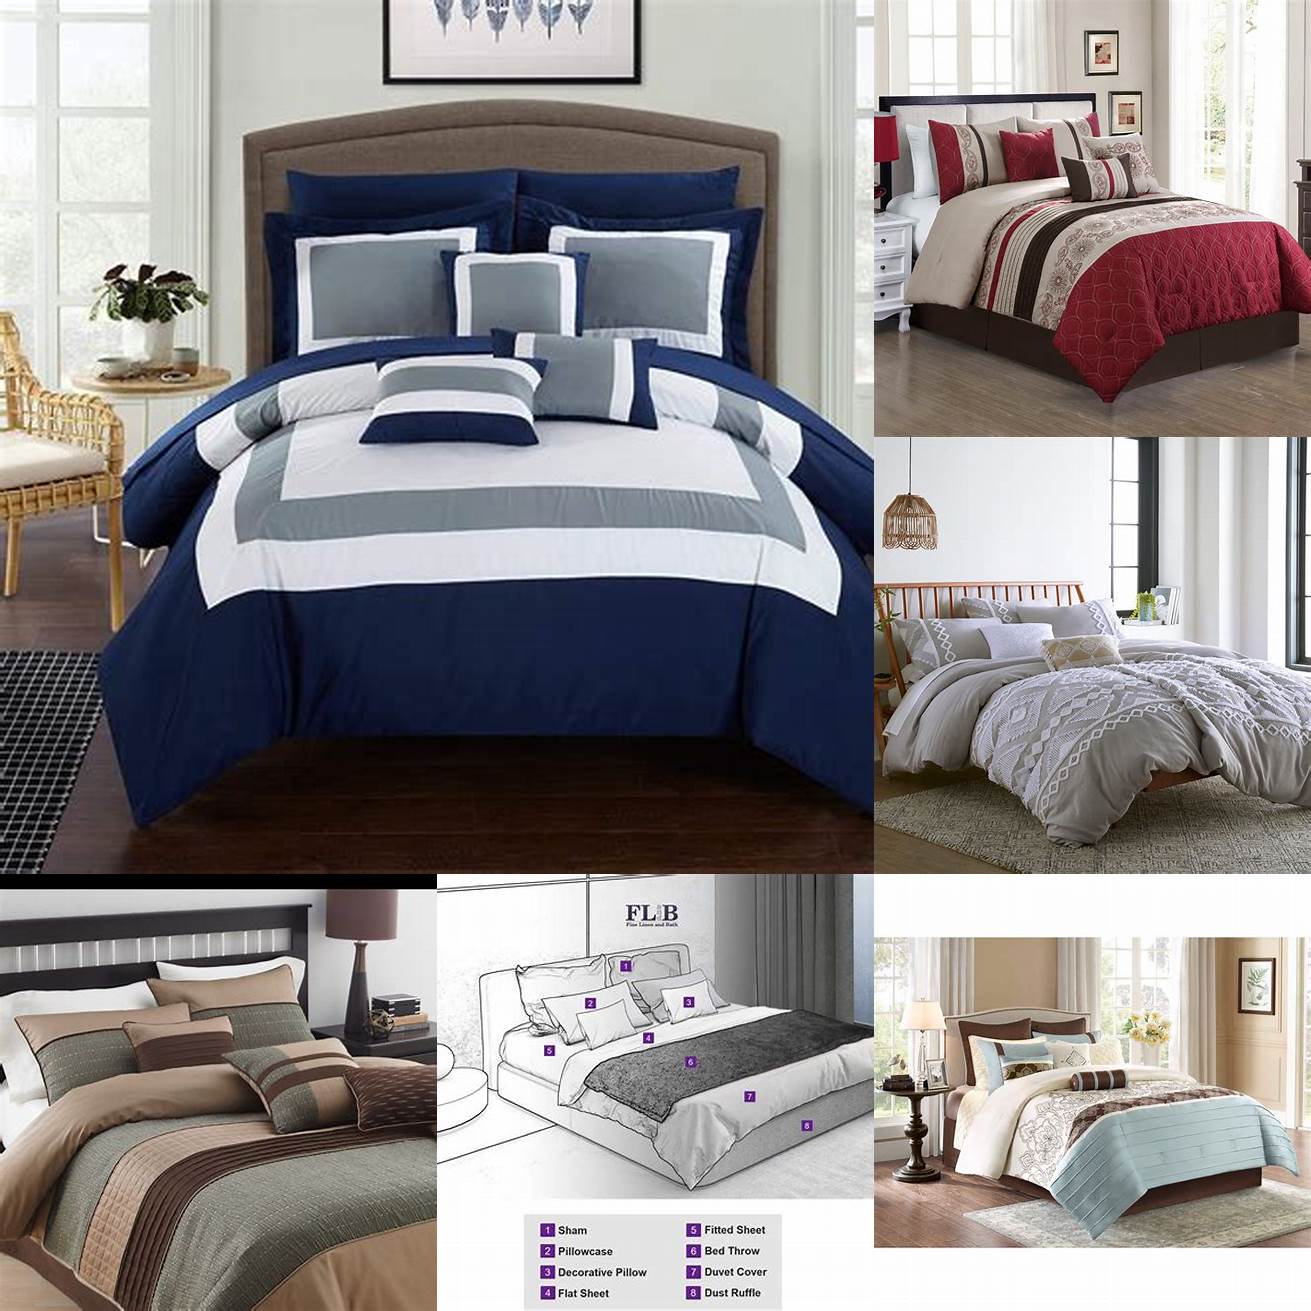 Compatible with various bedding